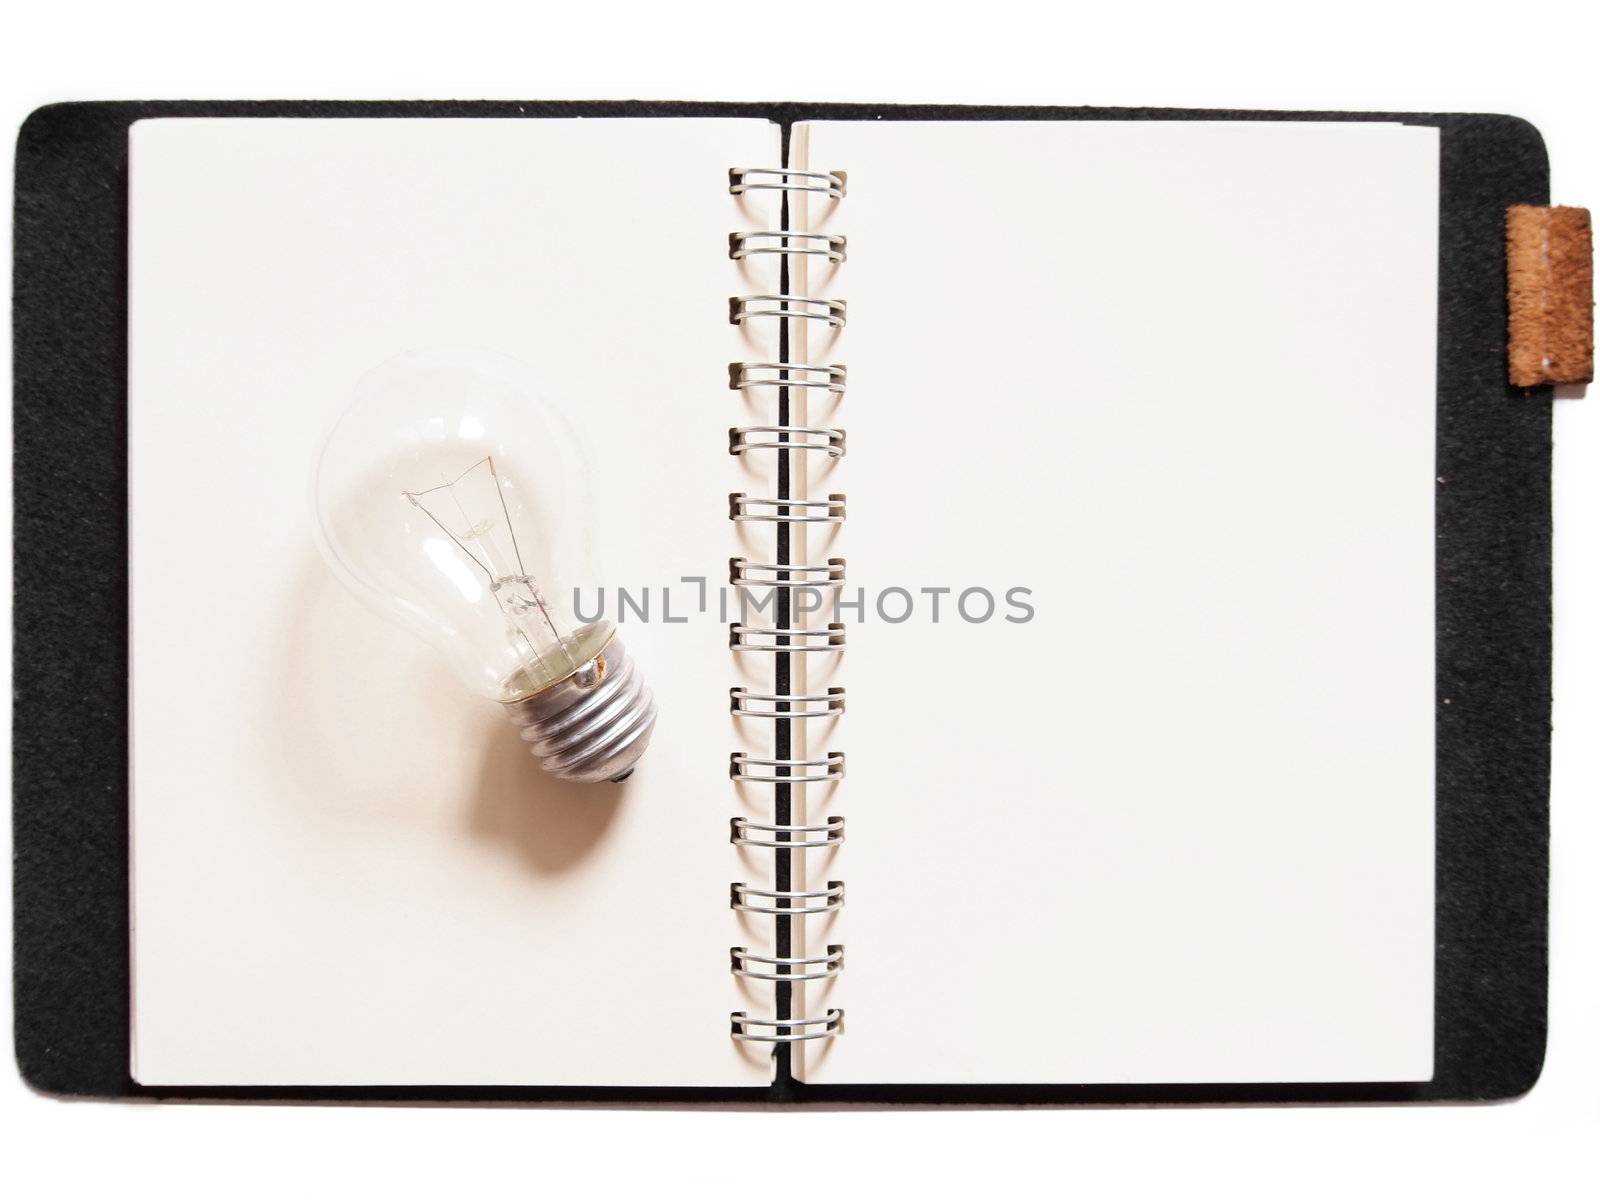 Light bulb placed on notebook by siraanamwong